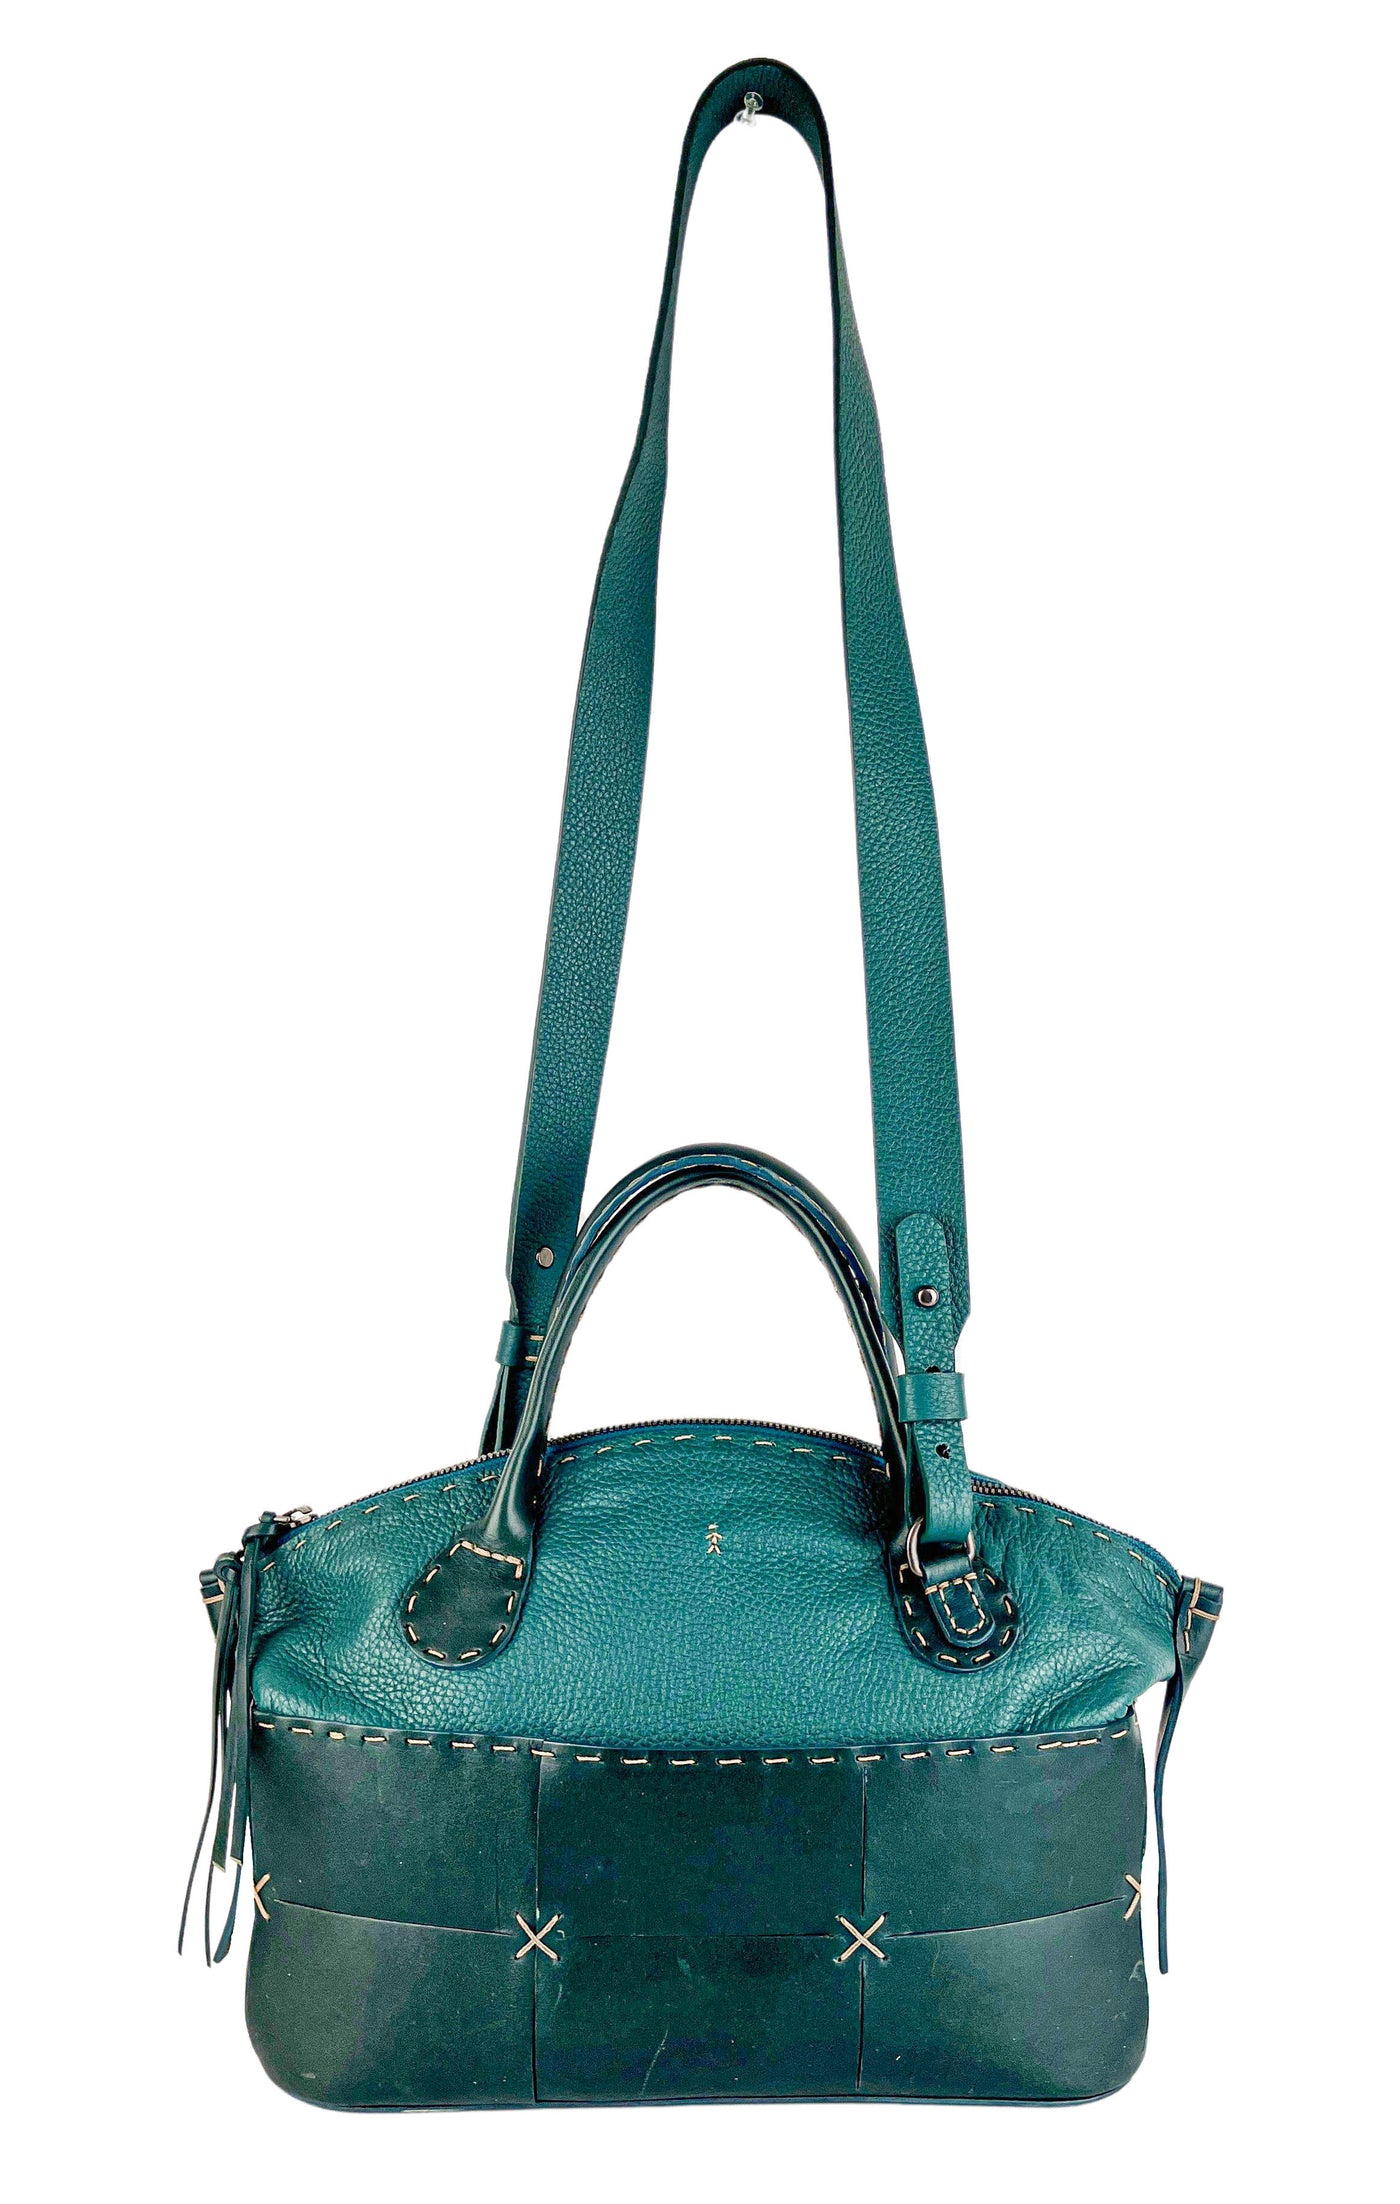 Henry Beguelin Virginia Mosaico Vegetal Wash in Teal - Discounts on Henry Beguelin at UAL